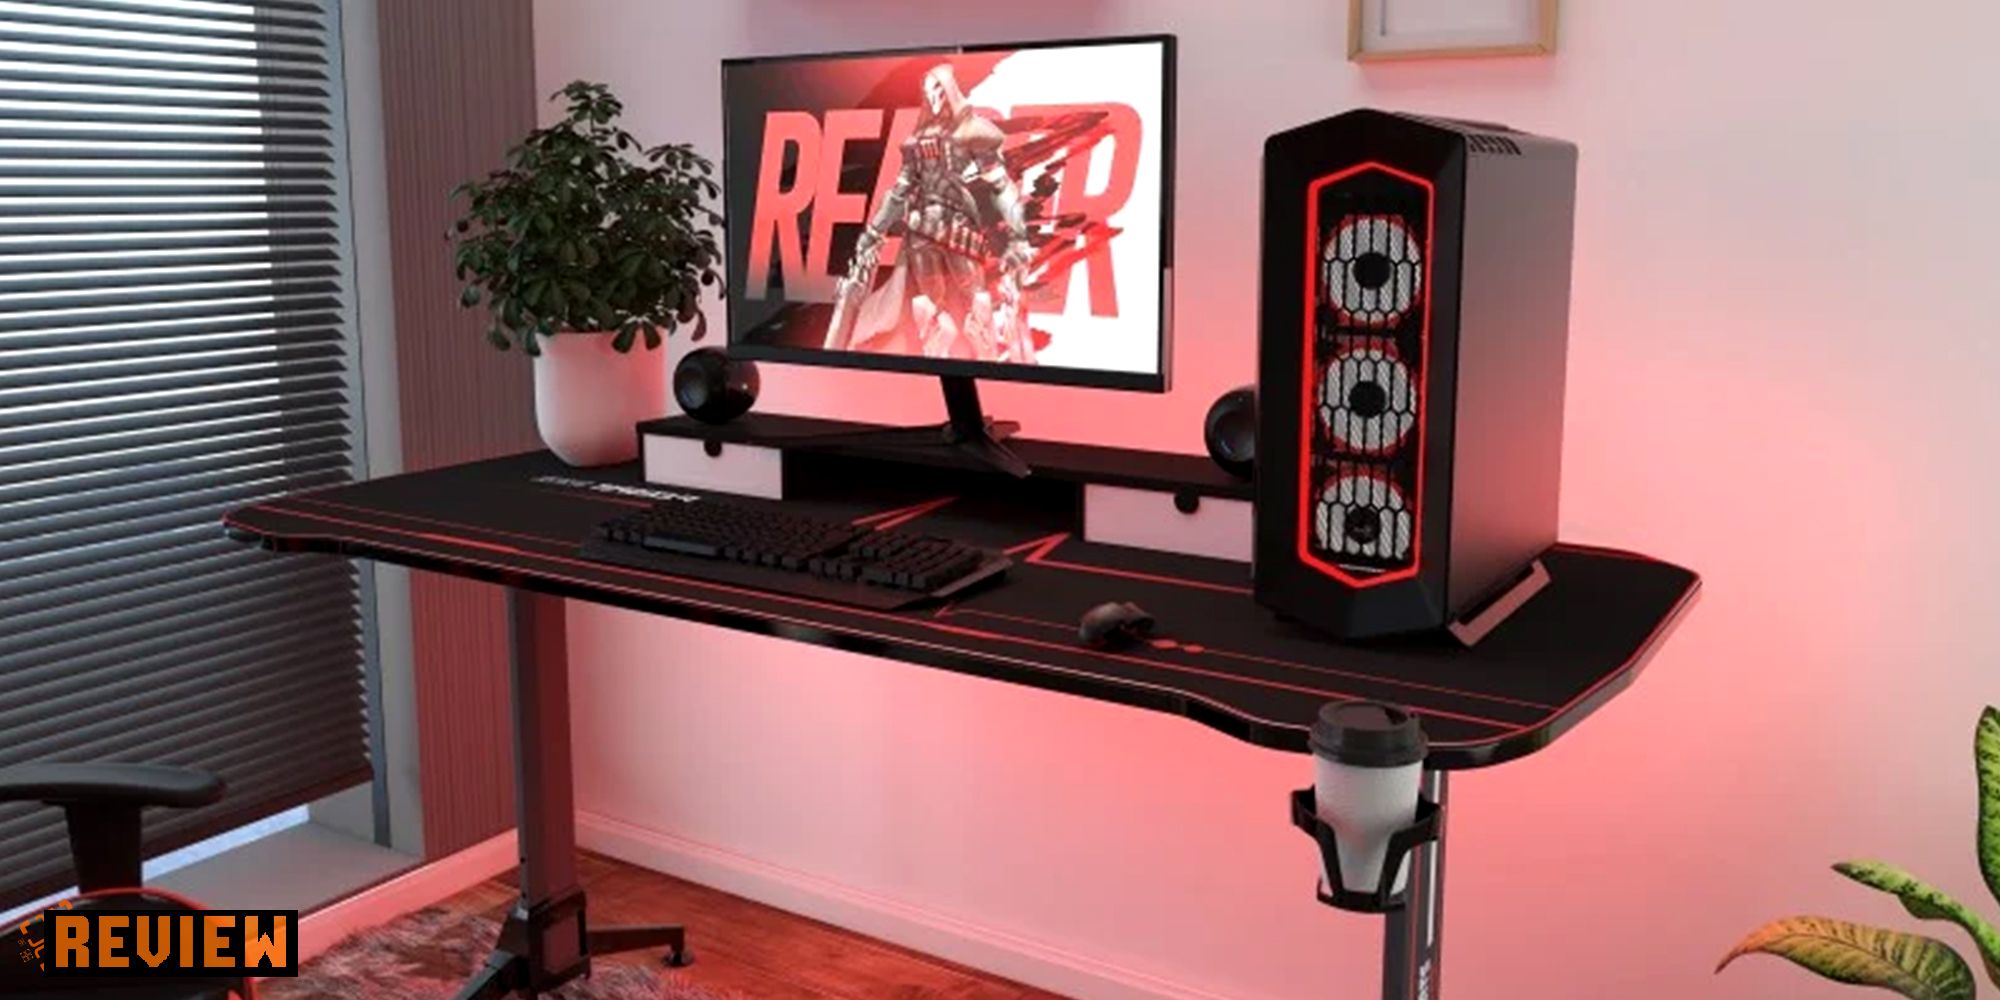 Product image of Flexispot Ergonomic Gaming Desk With Mouse Pad.